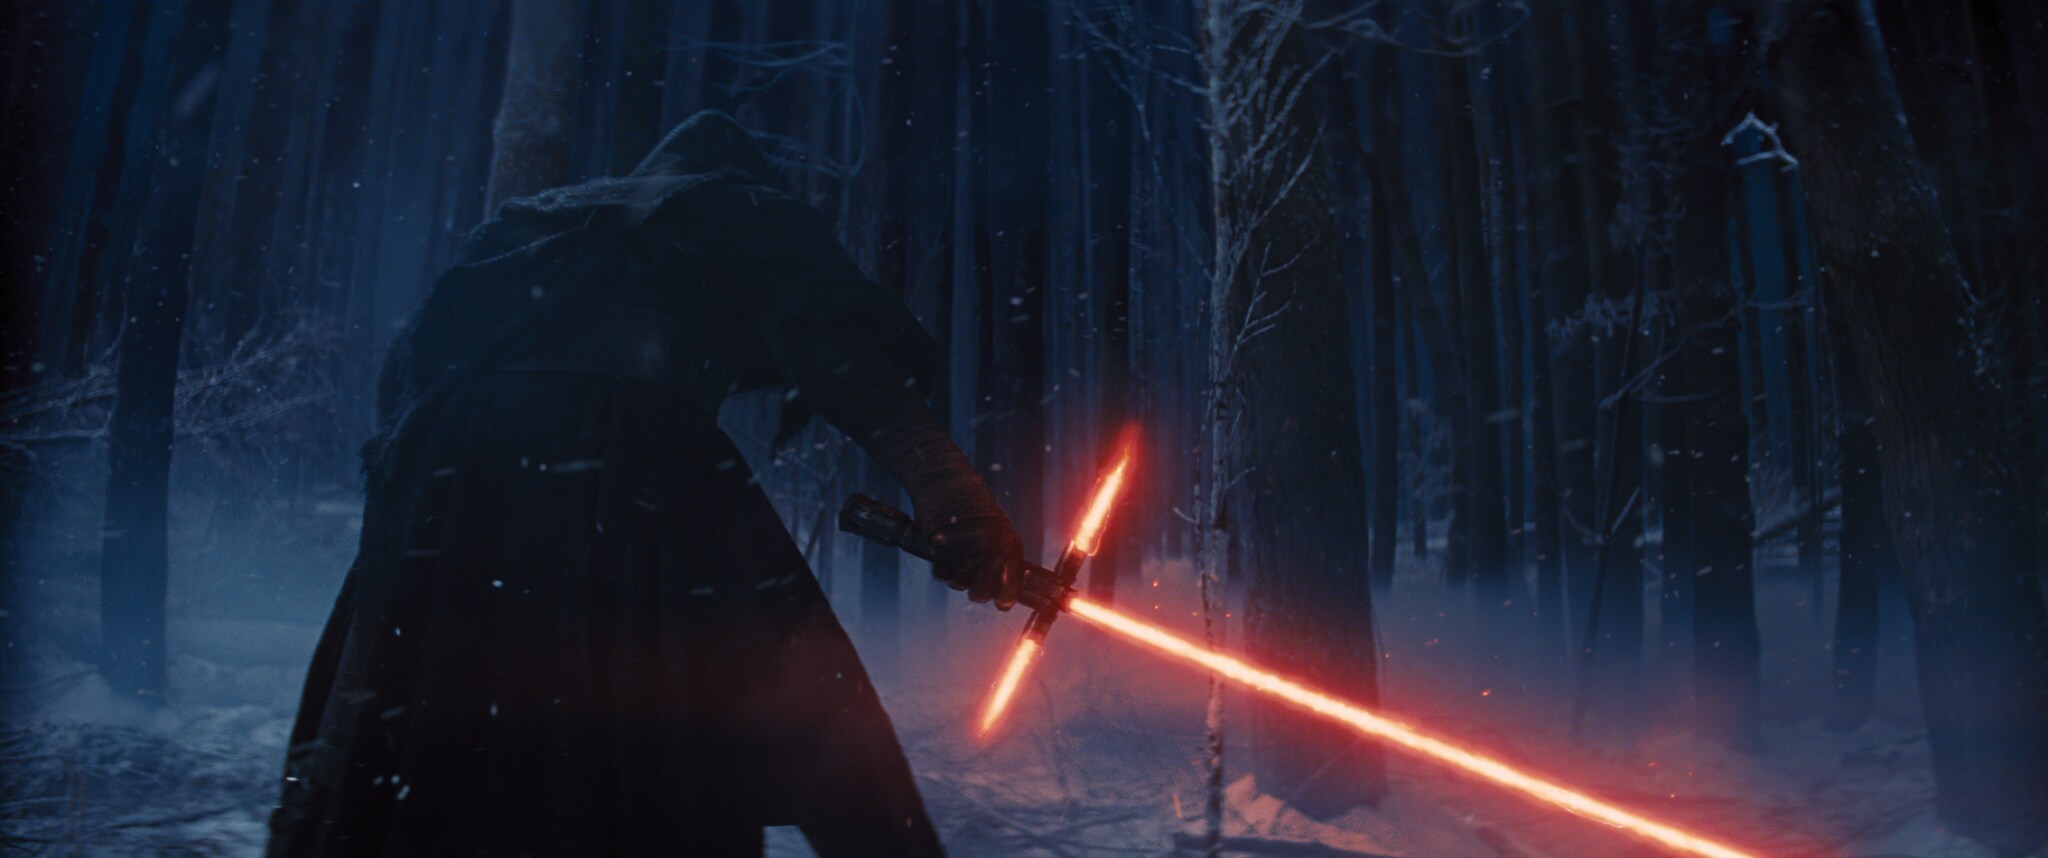 Adam Driver as Kylo Ren ignites his red lightsaber. From the movie, "Star Wars: The Force Awakens."